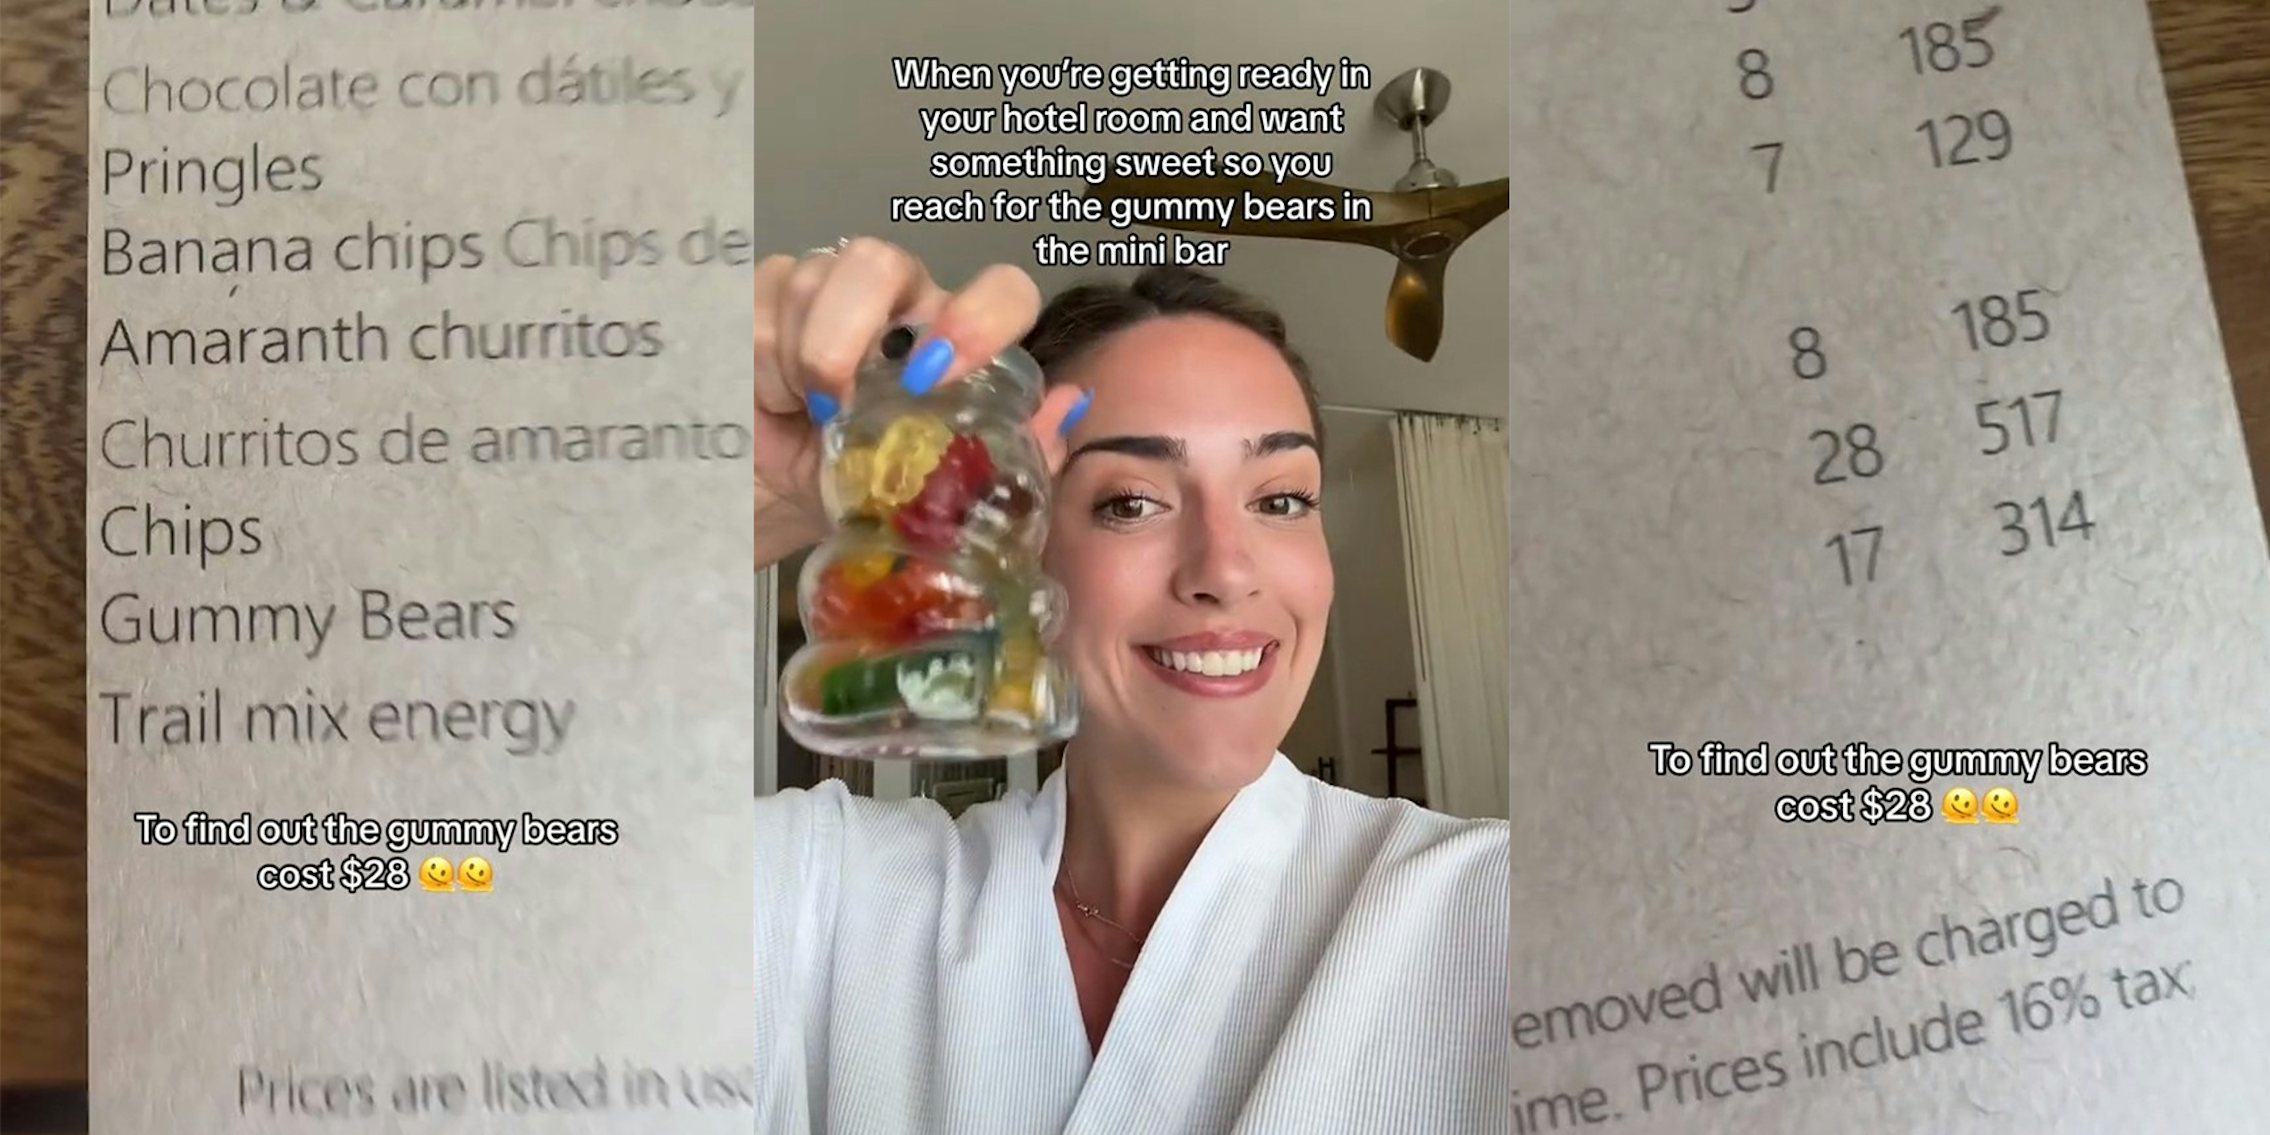 Customer finds out gummy bears in hotel's mini bar cost $28